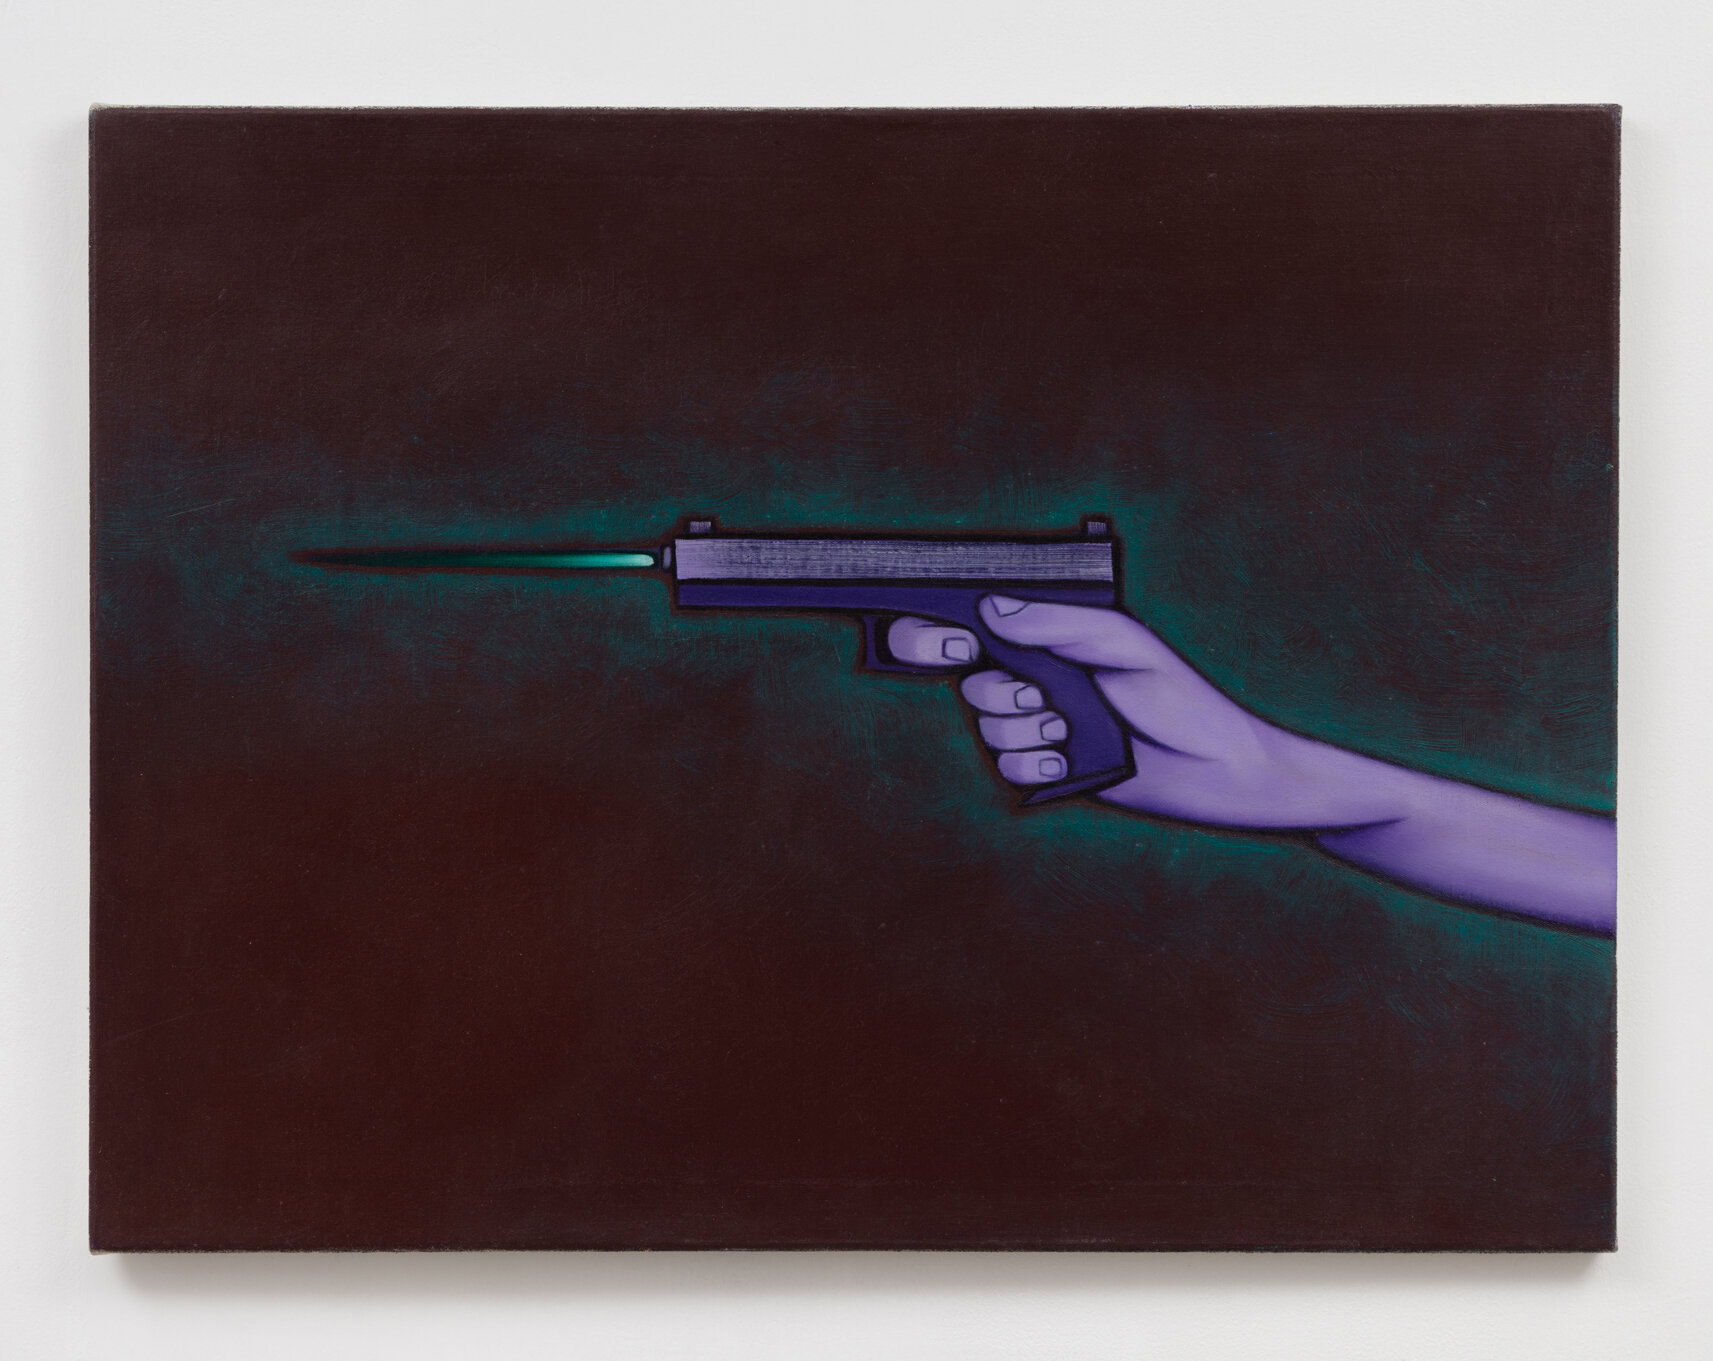   Glock 17,  2017. Oil on canvas. 24 x 32 inches. 